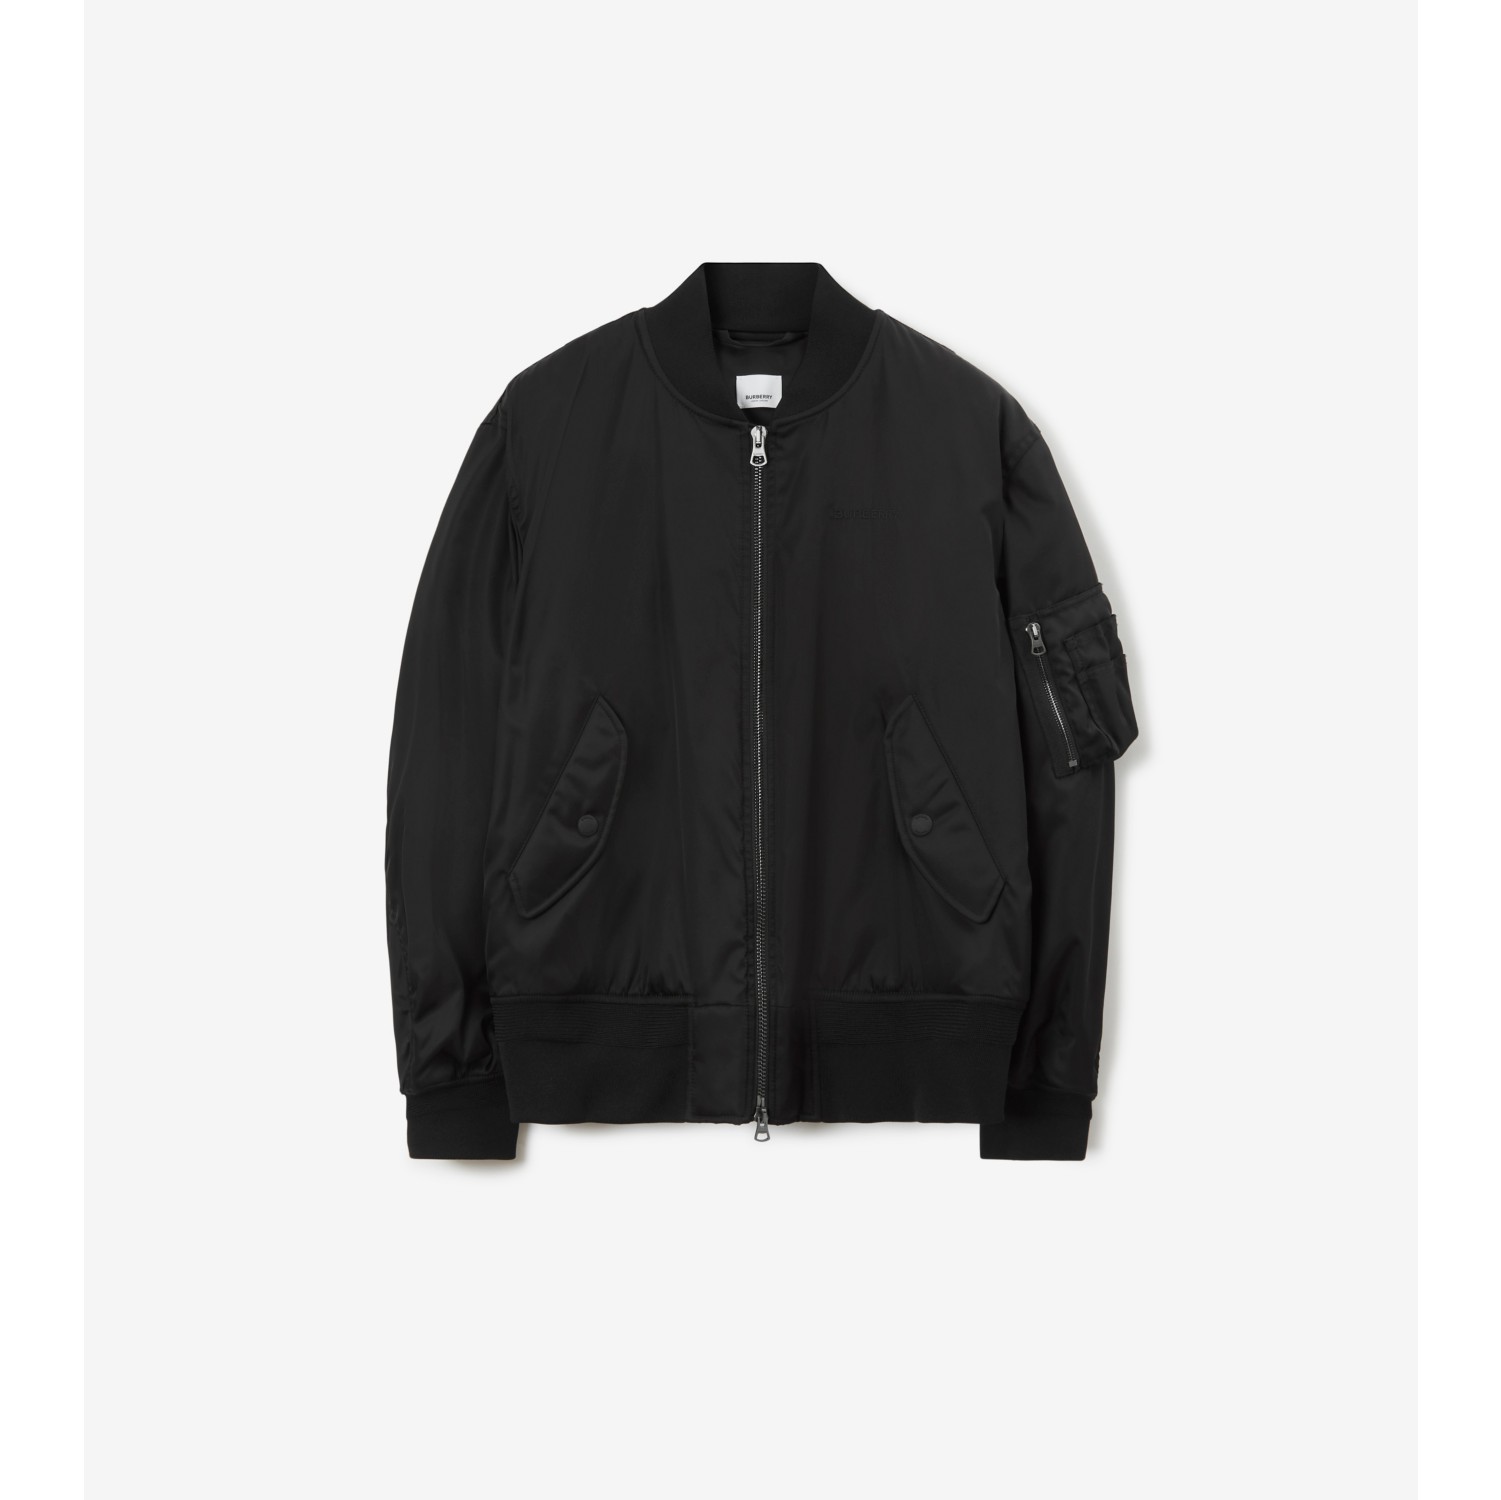 Embroidered Lightweight Bomber - Men - Ready-to-Wear